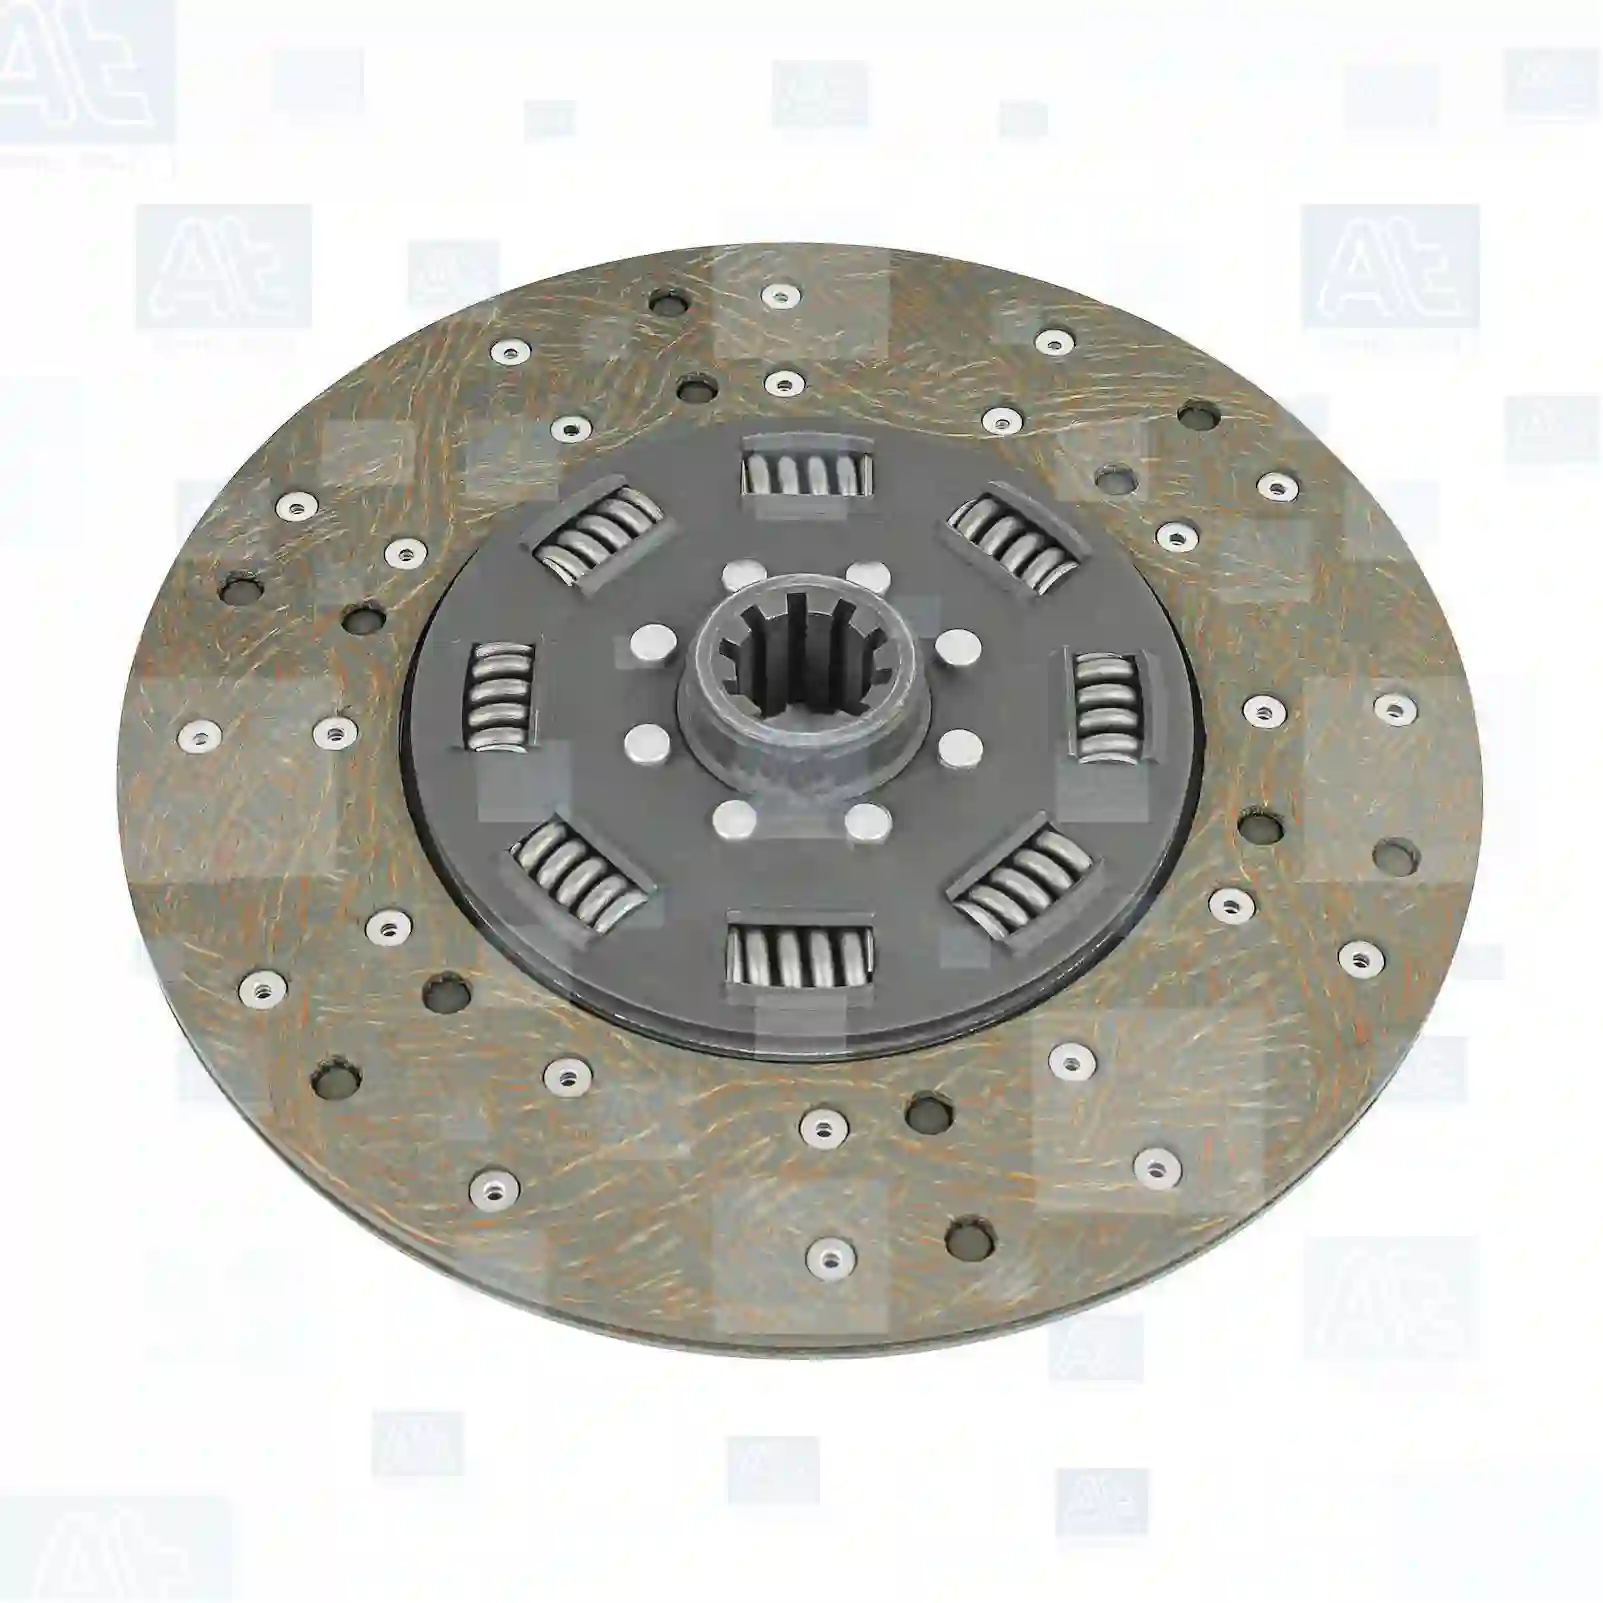 Clutch disc, 77721853, 354433A1, 0002500503, 0002503303, 0002503503, 0012500503, 0012503603, 0012504003, 0012504103, 0022503603, 0042506603, 0052509403, 0052509503, 0072501803, 0072501903, 0082502203, 0082502303, 0102508503, 0132505403, 0132508503, 0132508903, 0142505303, 0142505403, 0172501703, 0172501803, 0222501303, 3442507003, 1000160901, 159000160901, 354433A1, 59000160001, 59000160901 ||  77721853 At Spare Part | Engine, Accelerator Pedal, Camshaft, Connecting Rod, Crankcase, Crankshaft, Cylinder Head, Engine Suspension Mountings, Exhaust Manifold, Exhaust Gas Recirculation, Filter Kits, Flywheel Housing, General Overhaul Kits, Engine, Intake Manifold, Oil Cleaner, Oil Cooler, Oil Filter, Oil Pump, Oil Sump, Piston & Liner, Sensor & Switch, Timing Case, Turbocharger, Cooling System, Belt Tensioner, Coolant Filter, Coolant Pipe, Corrosion Prevention Agent, Drive, Expansion Tank, Fan, Intercooler, Monitors & Gauges, Radiator, Thermostat, V-Belt / Timing belt, Water Pump, Fuel System, Electronical Injector Unit, Feed Pump, Fuel Filter, cpl., Fuel Gauge Sender,  Fuel Line, Fuel Pump, Fuel Tank, Injection Line Kit, Injection Pump, Exhaust System, Clutch & Pedal, Gearbox, Propeller Shaft, Axles, Brake System, Hubs & Wheels, Suspension, Leaf Spring, Universal Parts / Accessories, Steering, Electrical System, Cabin Clutch disc, 77721853, 354433A1, 0002500503, 0002503303, 0002503503, 0012500503, 0012503603, 0012504003, 0012504103, 0022503603, 0042506603, 0052509403, 0052509503, 0072501803, 0072501903, 0082502203, 0082502303, 0102508503, 0132505403, 0132508503, 0132508903, 0142505303, 0142505403, 0172501703, 0172501803, 0222501303, 3442507003, 1000160901, 159000160901, 354433A1, 59000160001, 59000160901 ||  77721853 At Spare Part | Engine, Accelerator Pedal, Camshaft, Connecting Rod, Crankcase, Crankshaft, Cylinder Head, Engine Suspension Mountings, Exhaust Manifold, Exhaust Gas Recirculation, Filter Kits, Flywheel Housing, General Overhaul Kits, Engine, Intake Manifold, Oil Cleaner, Oil Cooler, Oil Filter, Oil Pump, Oil Sump, Piston & Liner, Sensor & Switch, Timing Case, Turbocharger, Cooling System, Belt Tensioner, Coolant Filter, Coolant Pipe, Corrosion Prevention Agent, Drive, Expansion Tank, Fan, Intercooler, Monitors & Gauges, Radiator, Thermostat, V-Belt / Timing belt, Water Pump, Fuel System, Electronical Injector Unit, Feed Pump, Fuel Filter, cpl., Fuel Gauge Sender,  Fuel Line, Fuel Pump, Fuel Tank, Injection Line Kit, Injection Pump, Exhaust System, Clutch & Pedal, Gearbox, Propeller Shaft, Axles, Brake System, Hubs & Wheels, Suspension, Leaf Spring, Universal Parts / Accessories, Steering, Electrical System, Cabin